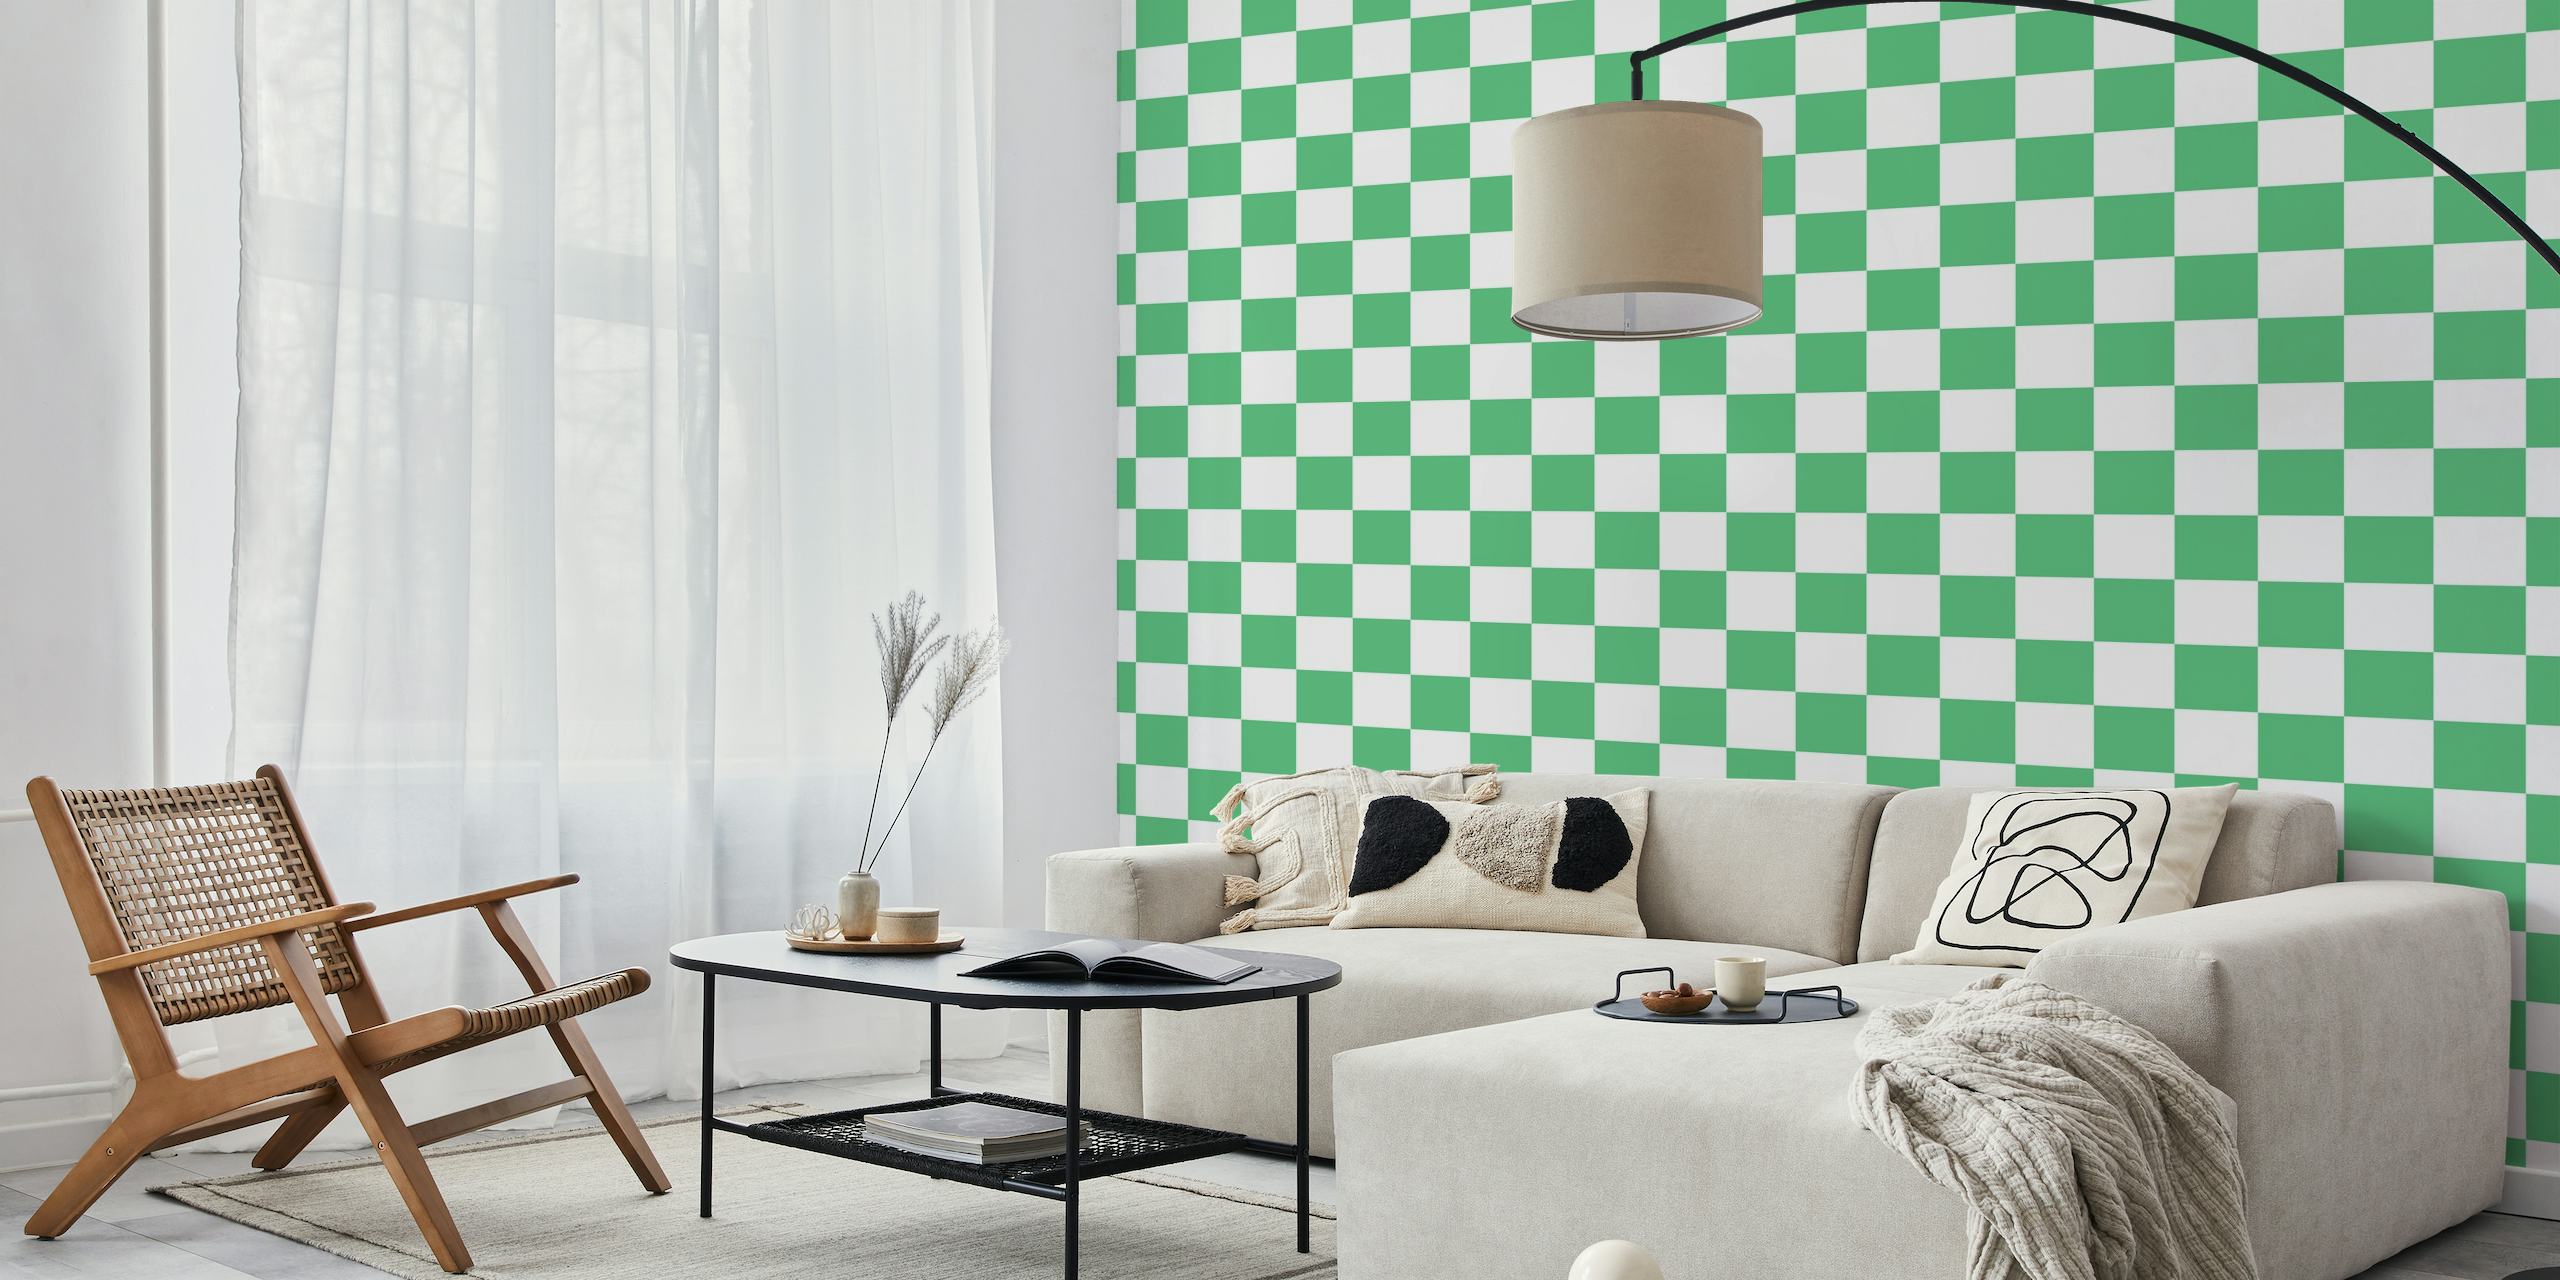 Large checkerboard pattern wall mural in mint green and white